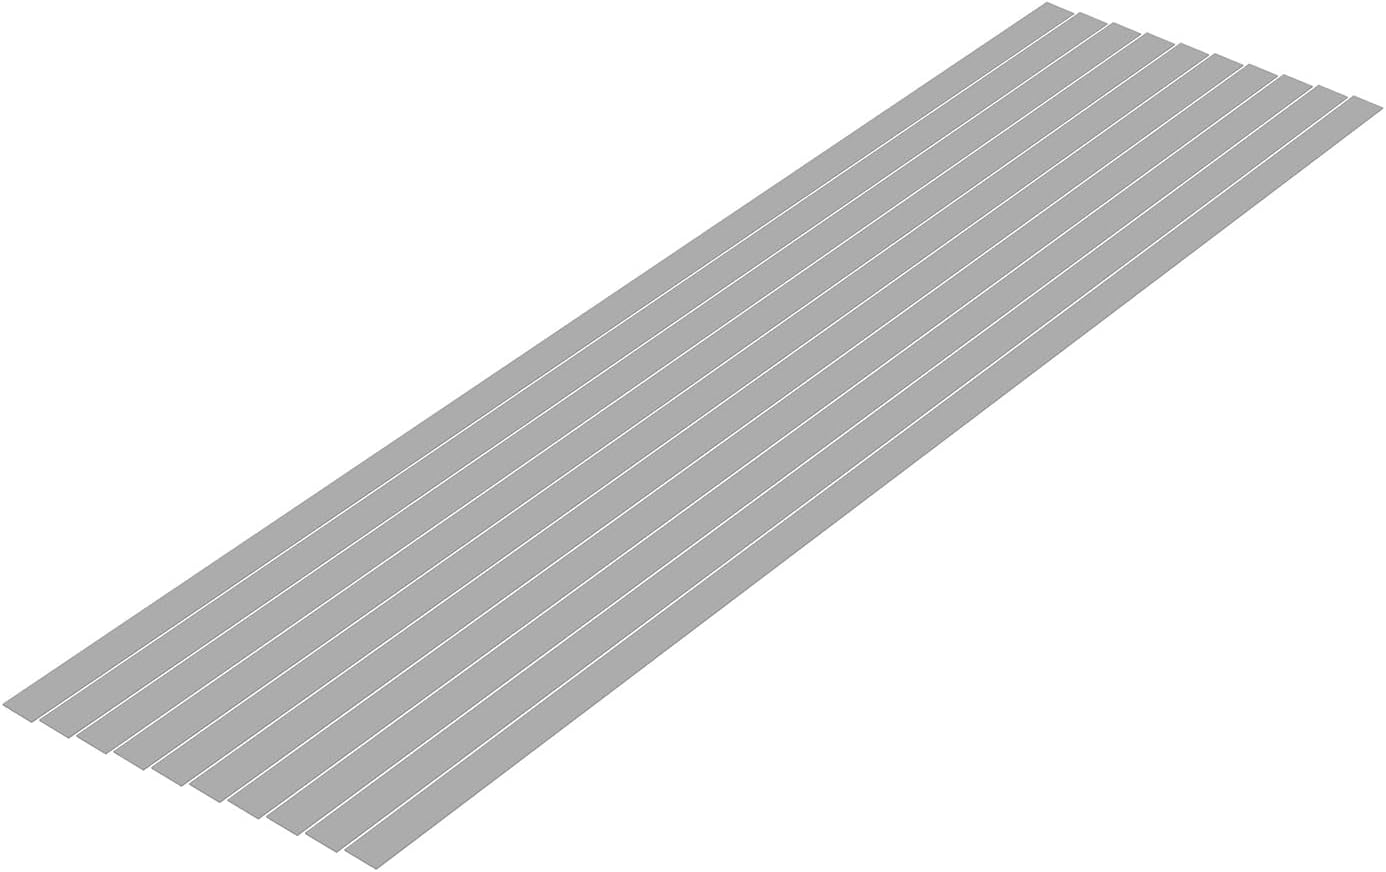 Wave OM-468 Material Series Plastic Material Gray Shredded Board 0.01 x 0.3 inches (8.0 mm), 10 Pieces, Hobby Material - BanzaiHobby